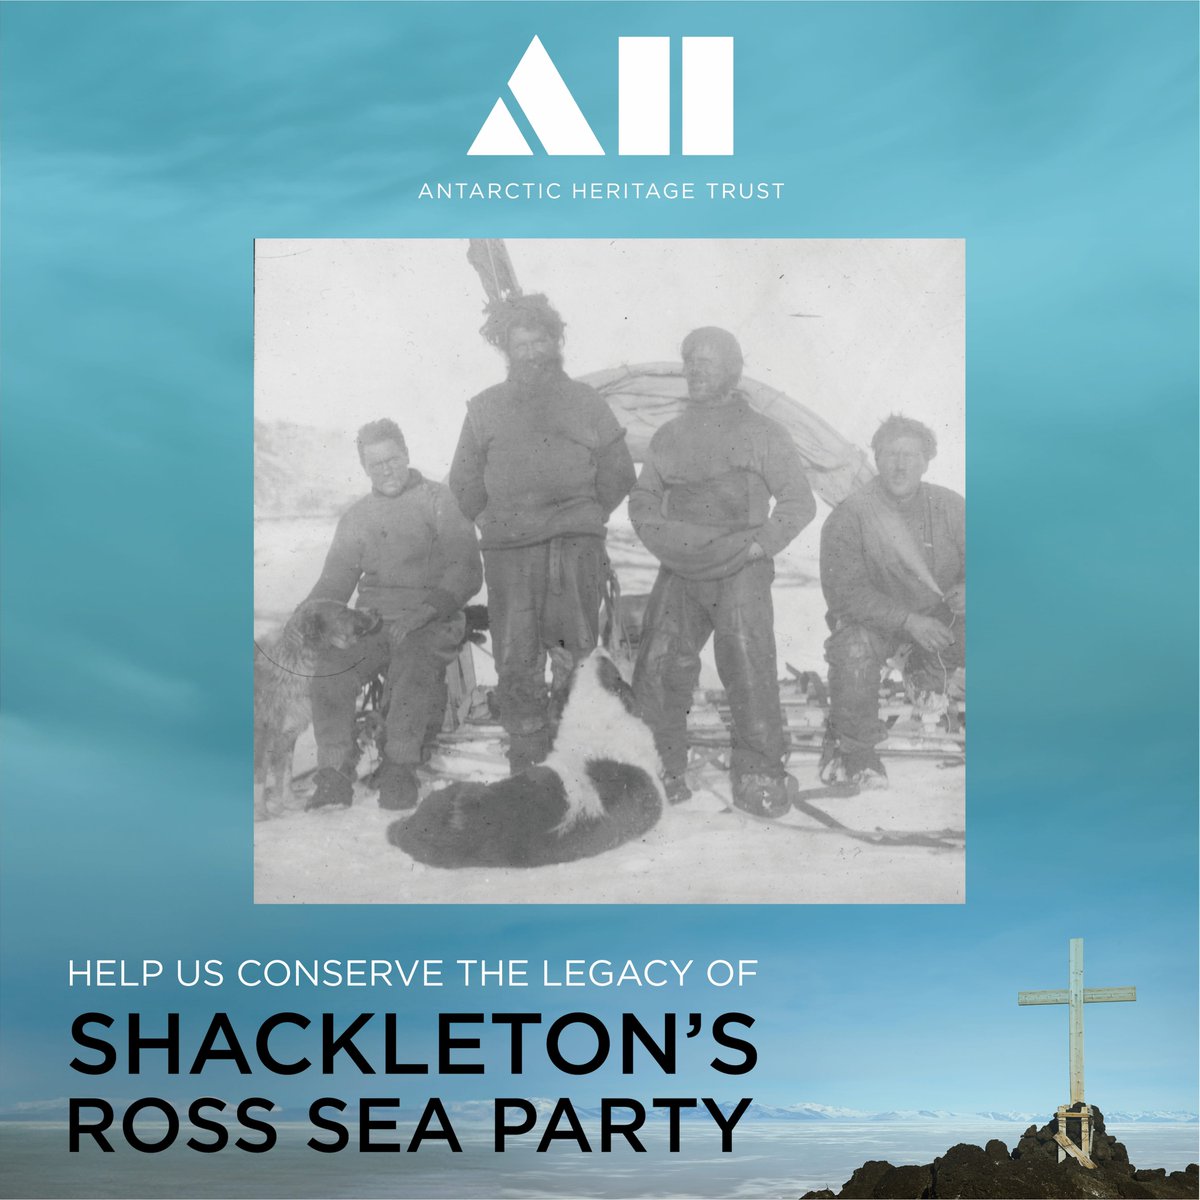 #OTD 1916, Victor Hayward and Aeneas Mackintosh were last seen as they left Hut Point intending to return to base at Cape Evans despite it being too early in the season for sea-ice to be solid. A search party found evidence the pair had been carried out to sea on an ice floe.